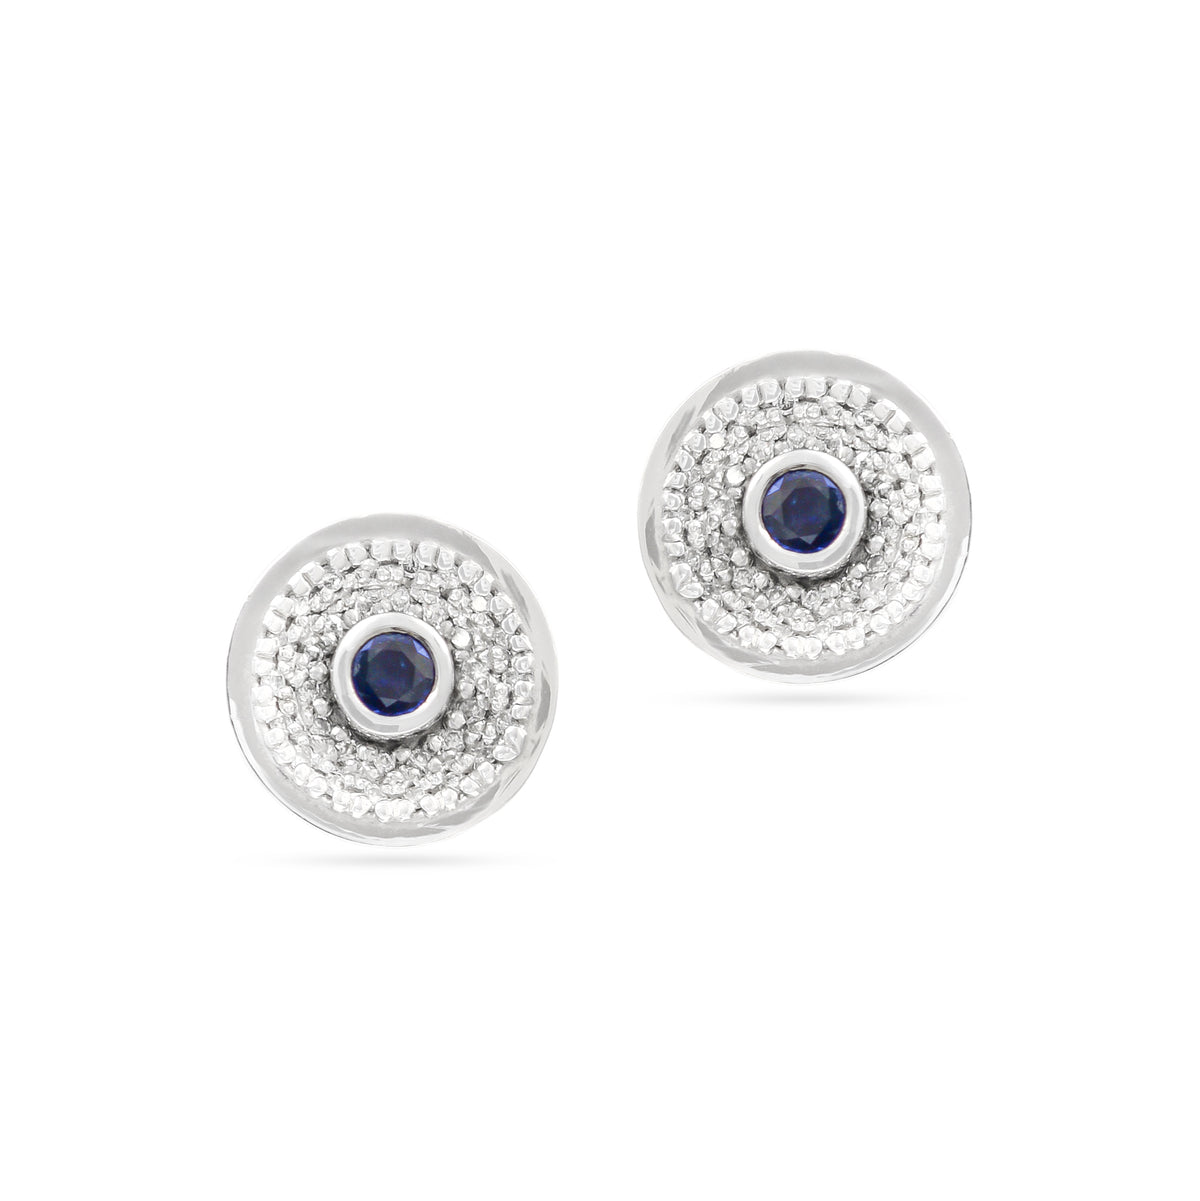 18ct White Gold Sapphire and Diamond Disc Stud Earrings